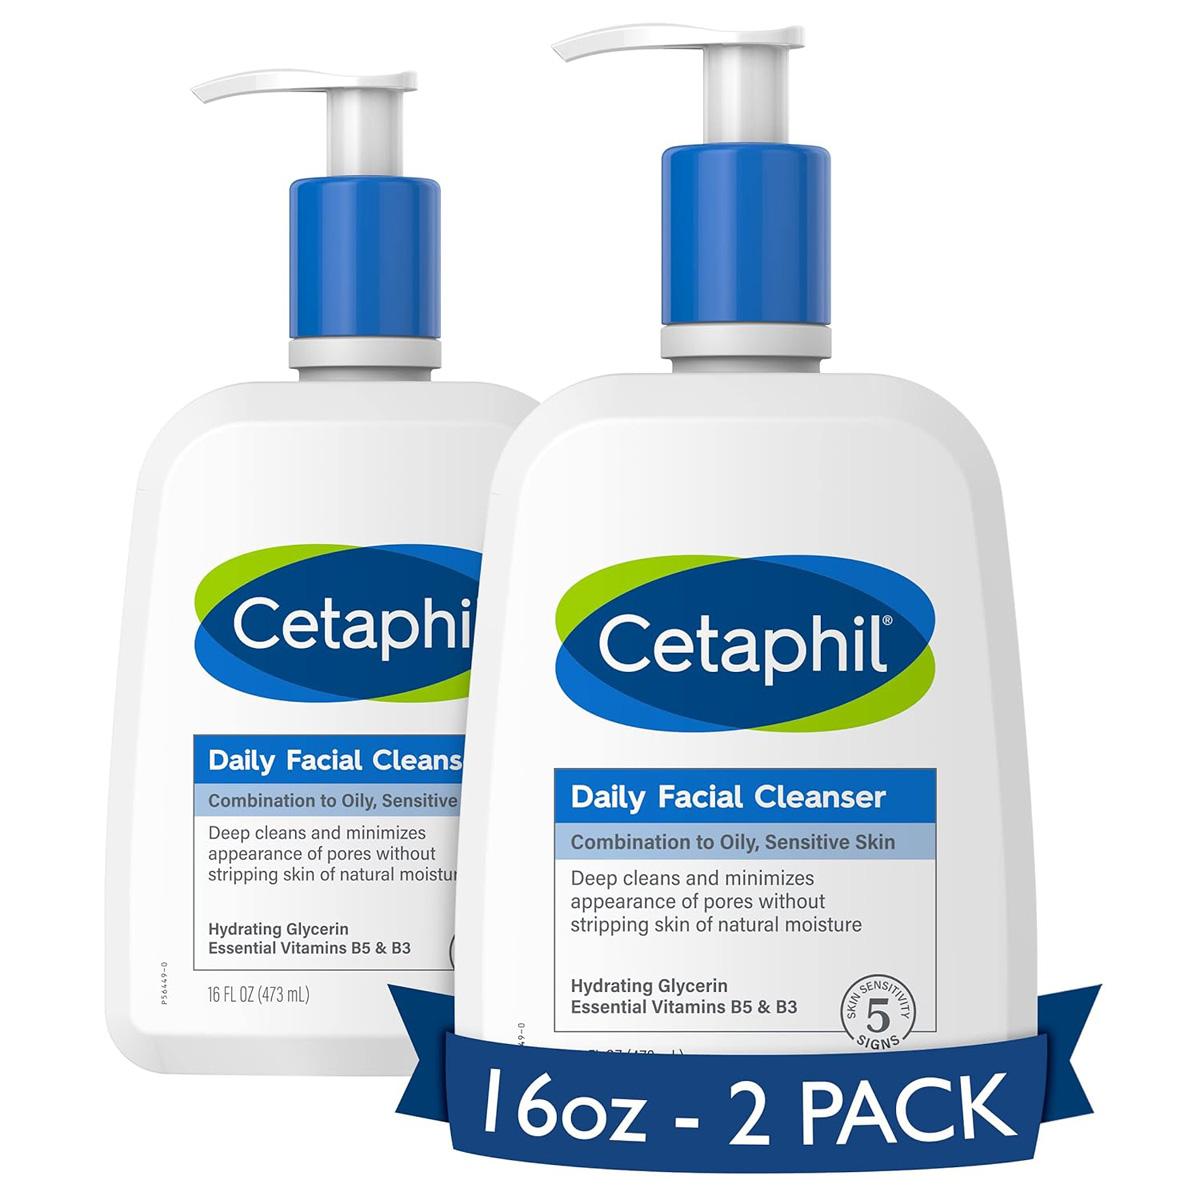 Cetaphil Daily Facial Cleanser 2 Pack for $14.94